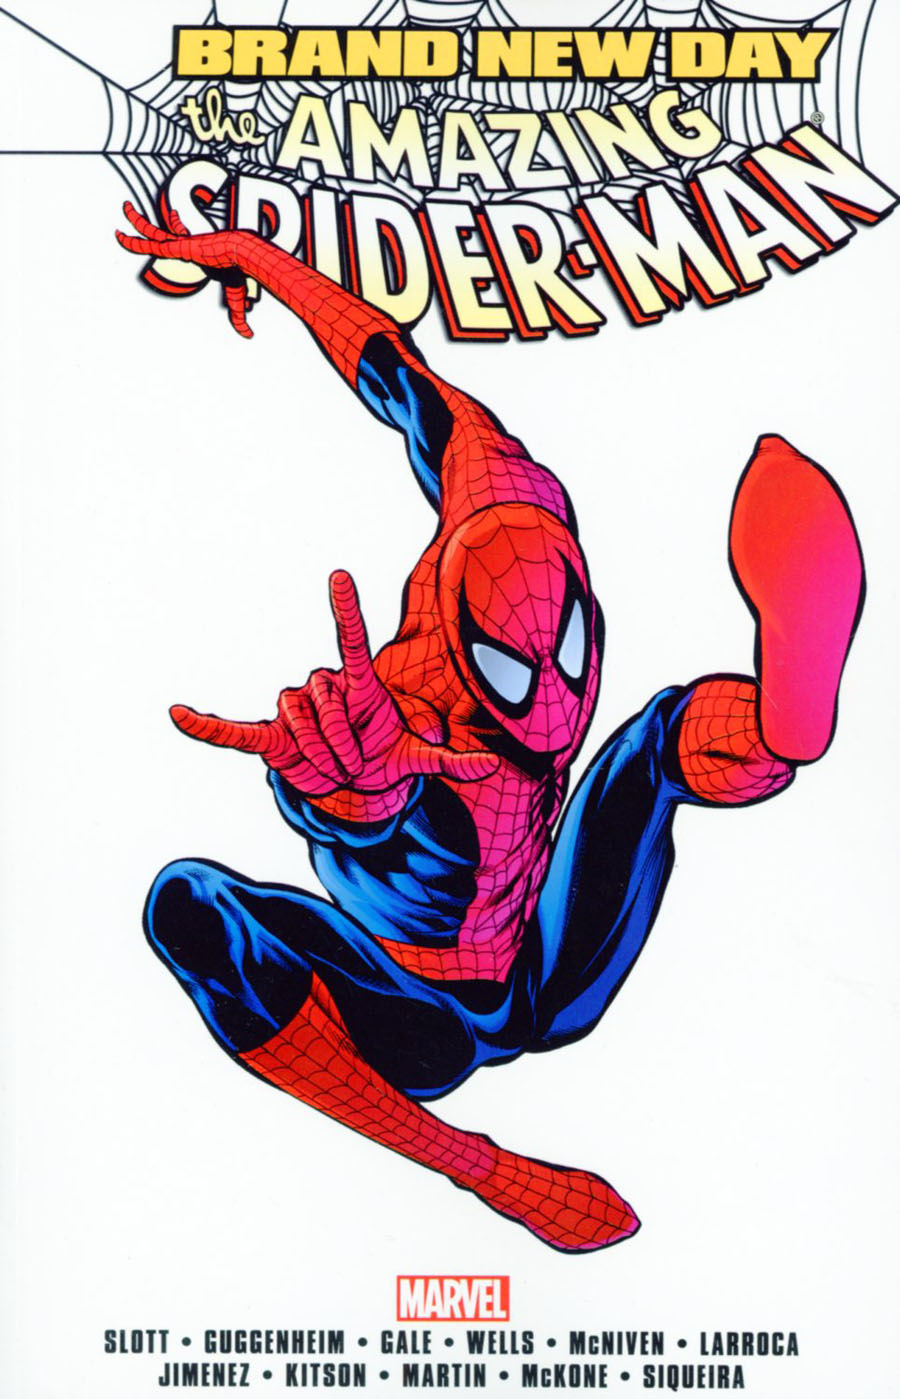 Spider-Man Brand New Day Complete Collection Vol 1 TP